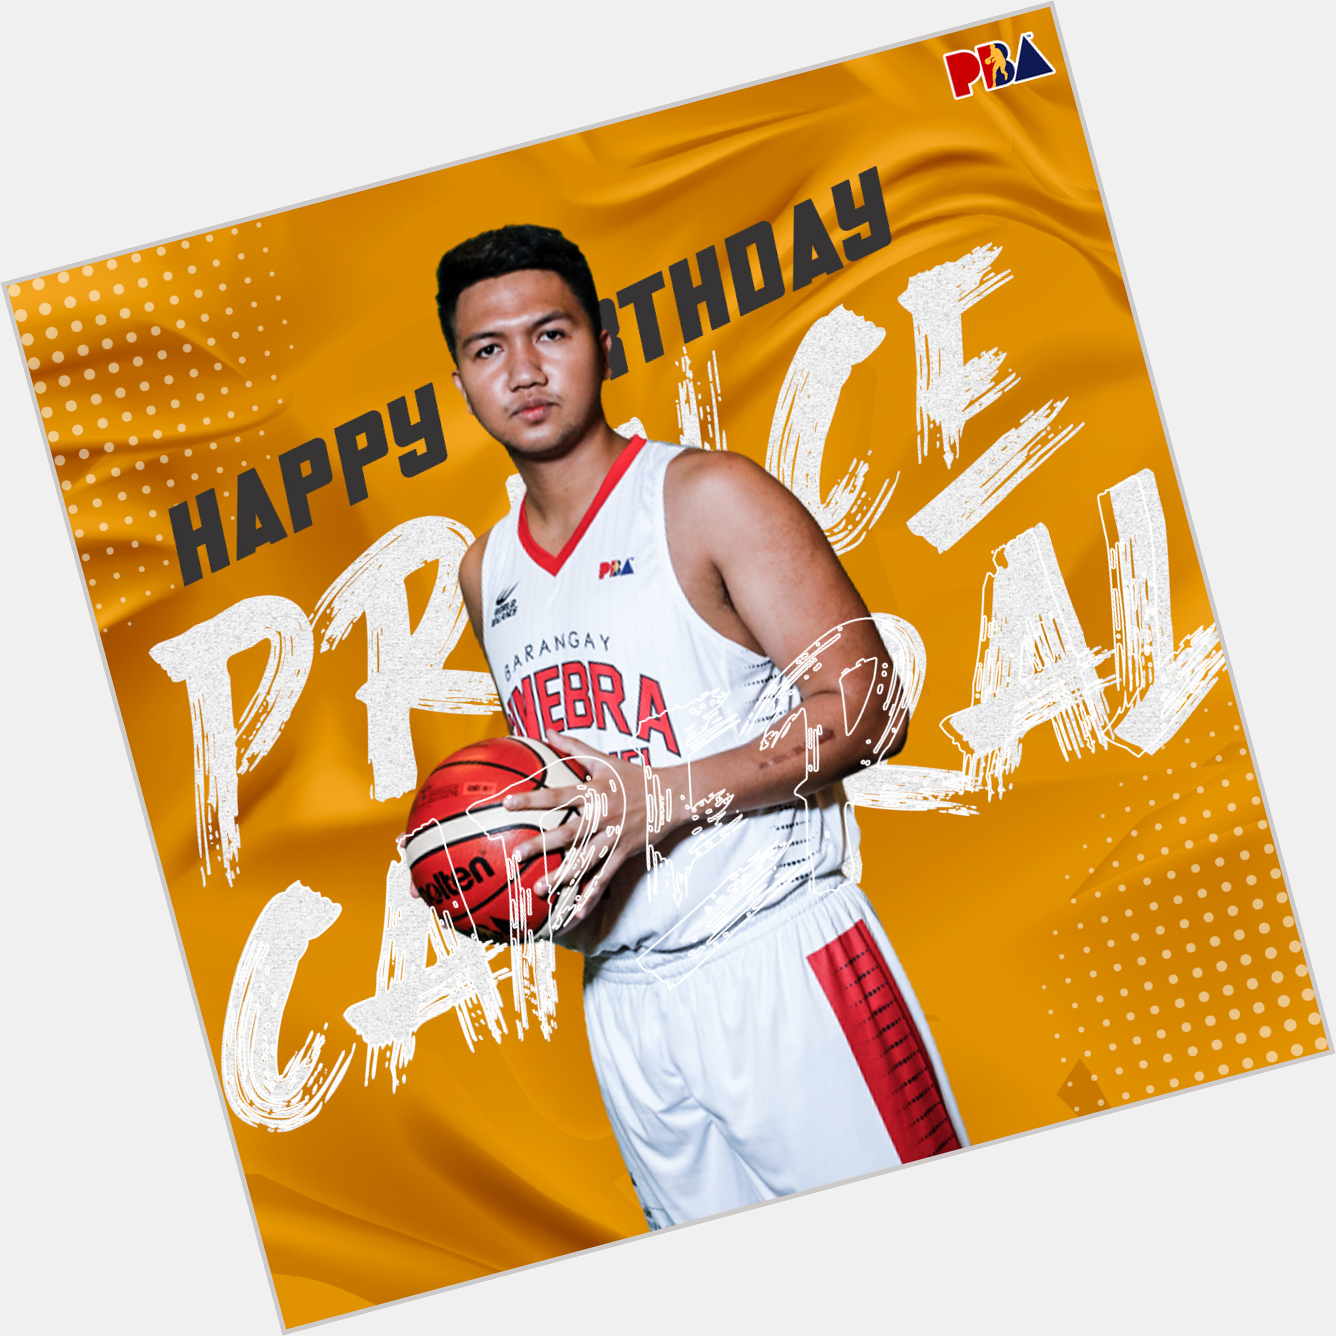 Pbaconnect: Happy 28th birthday to Prince Caperal! 